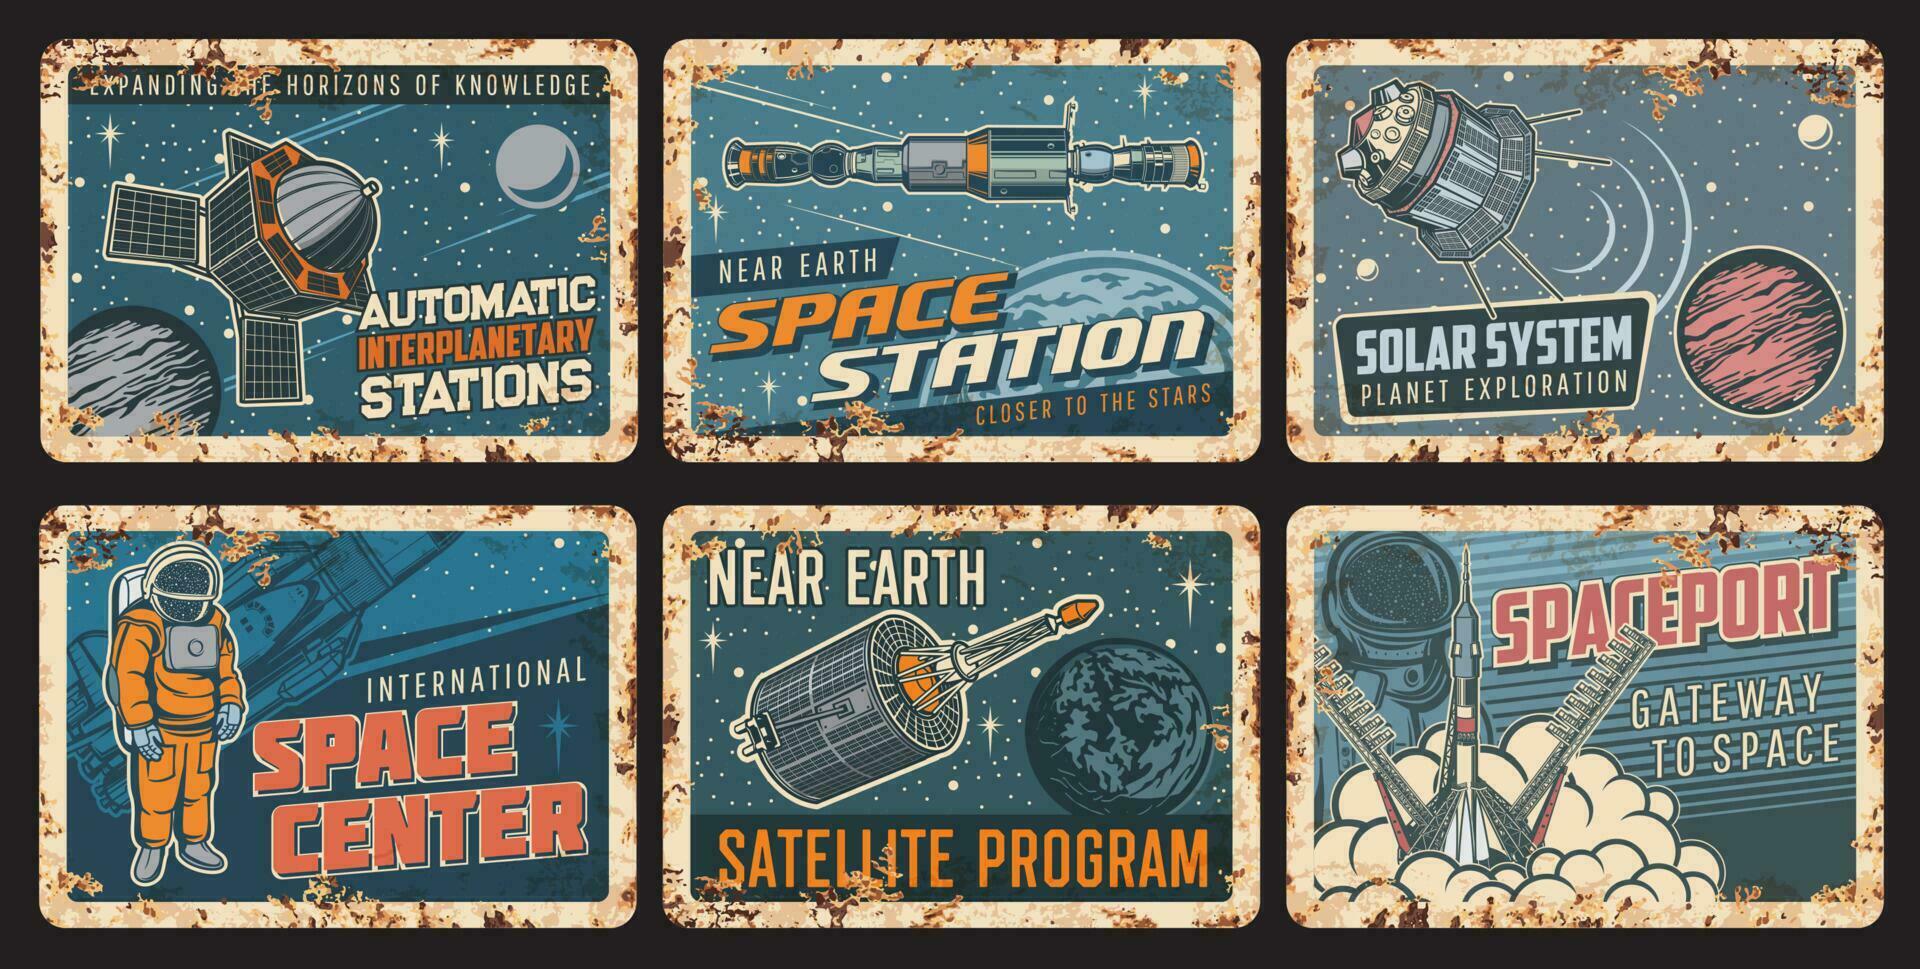 Orbital space station and satellite rusty plates vector